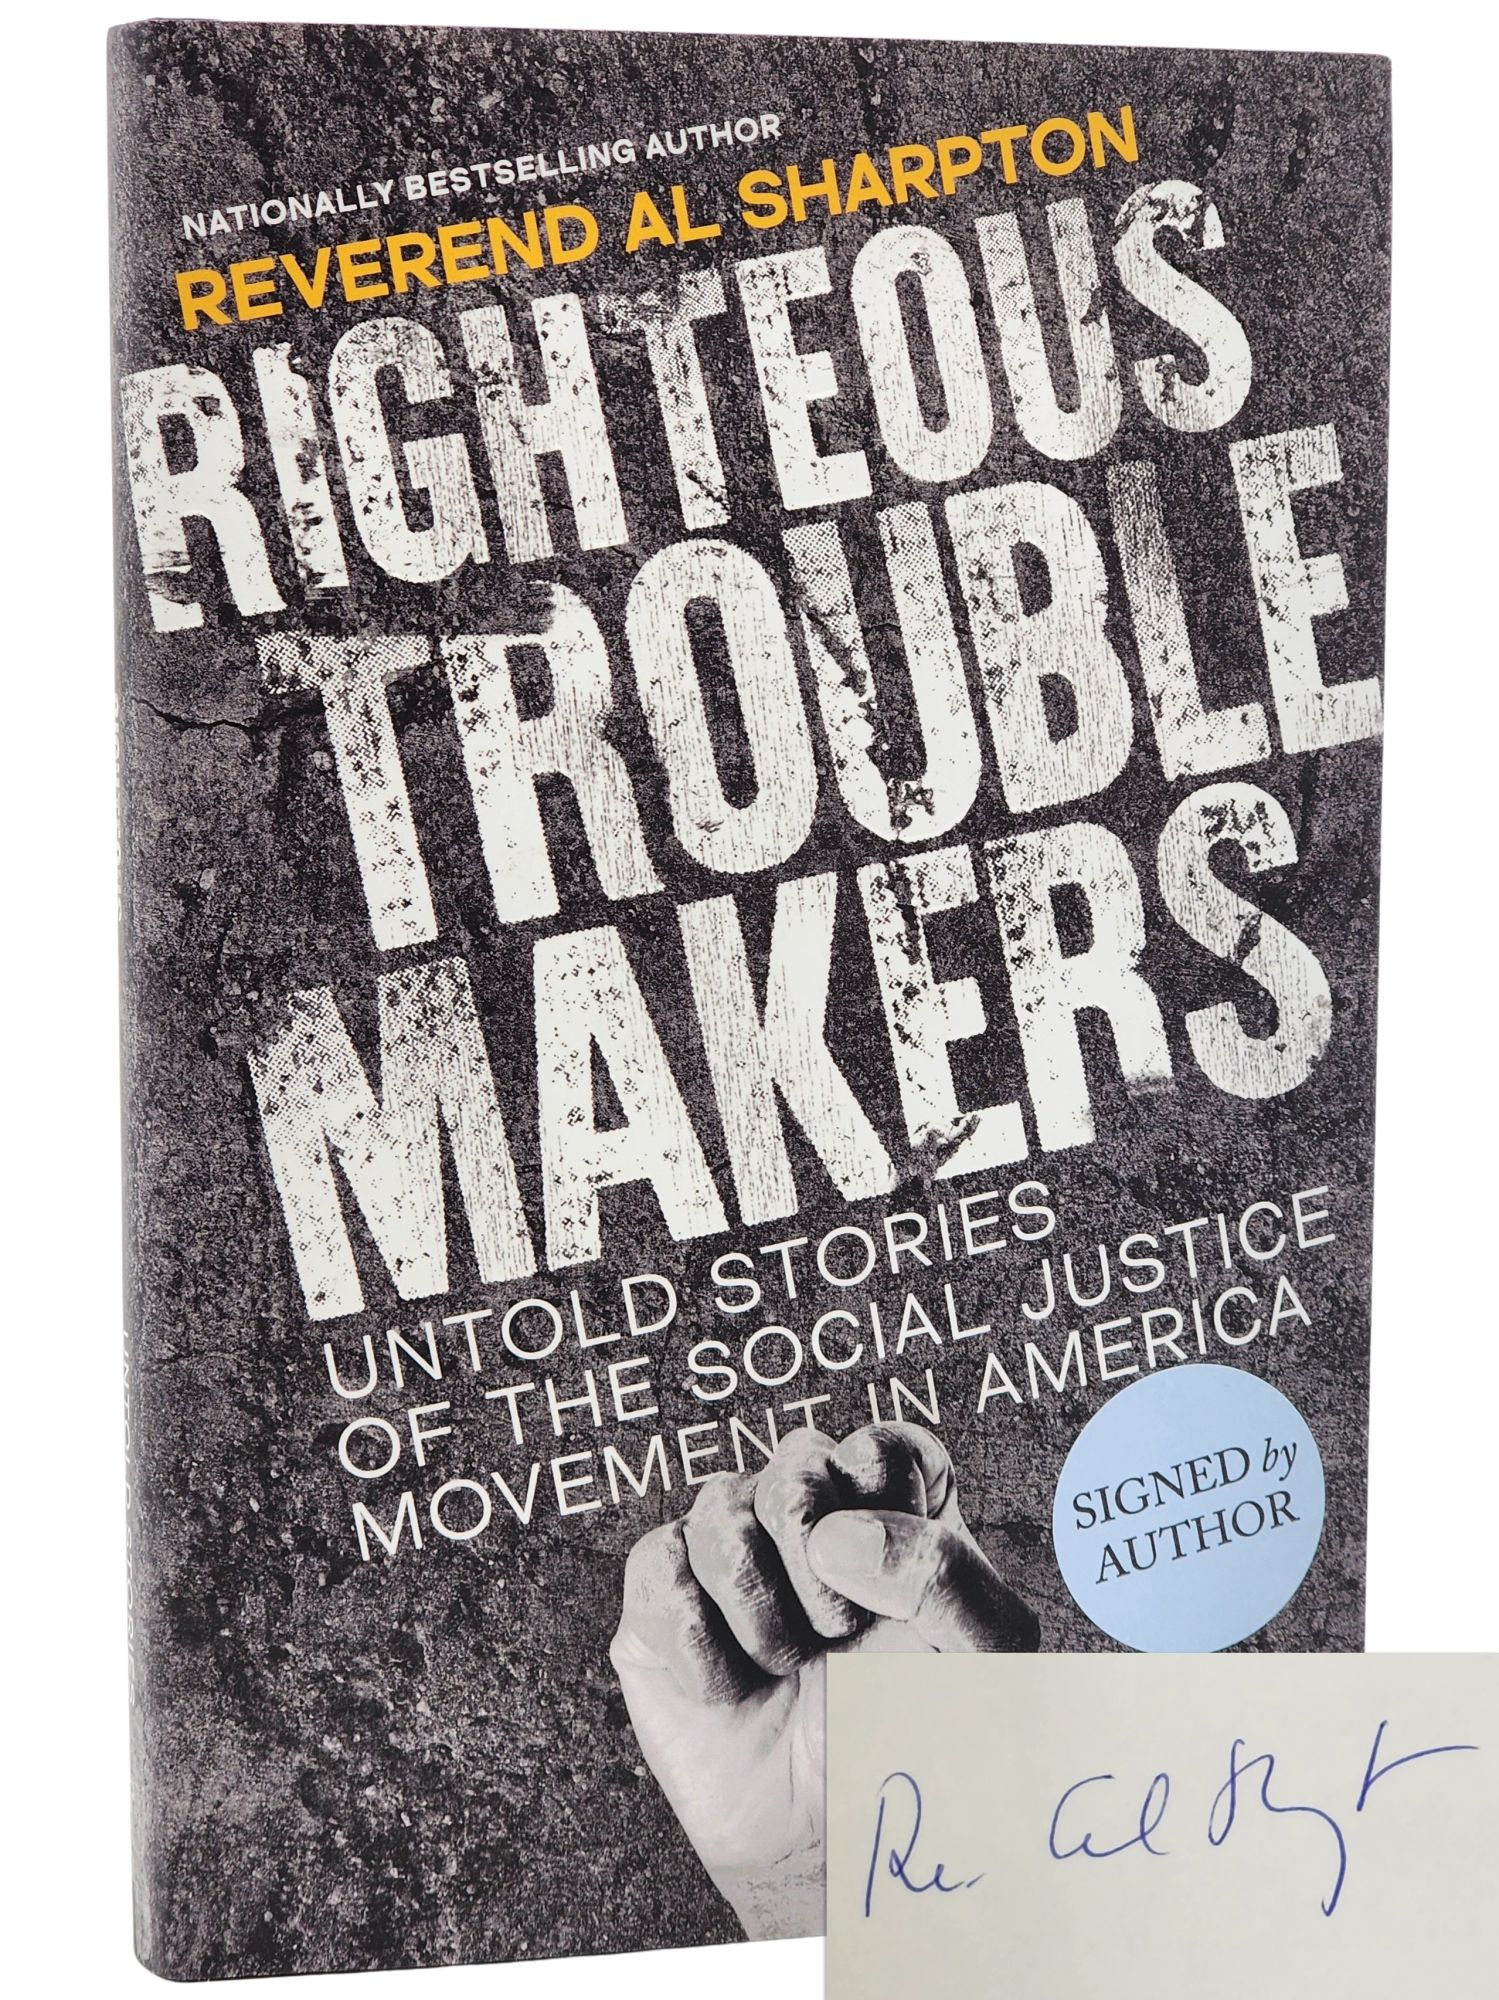 [Book #50849] RIGHTEOUS TROUBLEMAKERS. Reverand Al Sharpton.